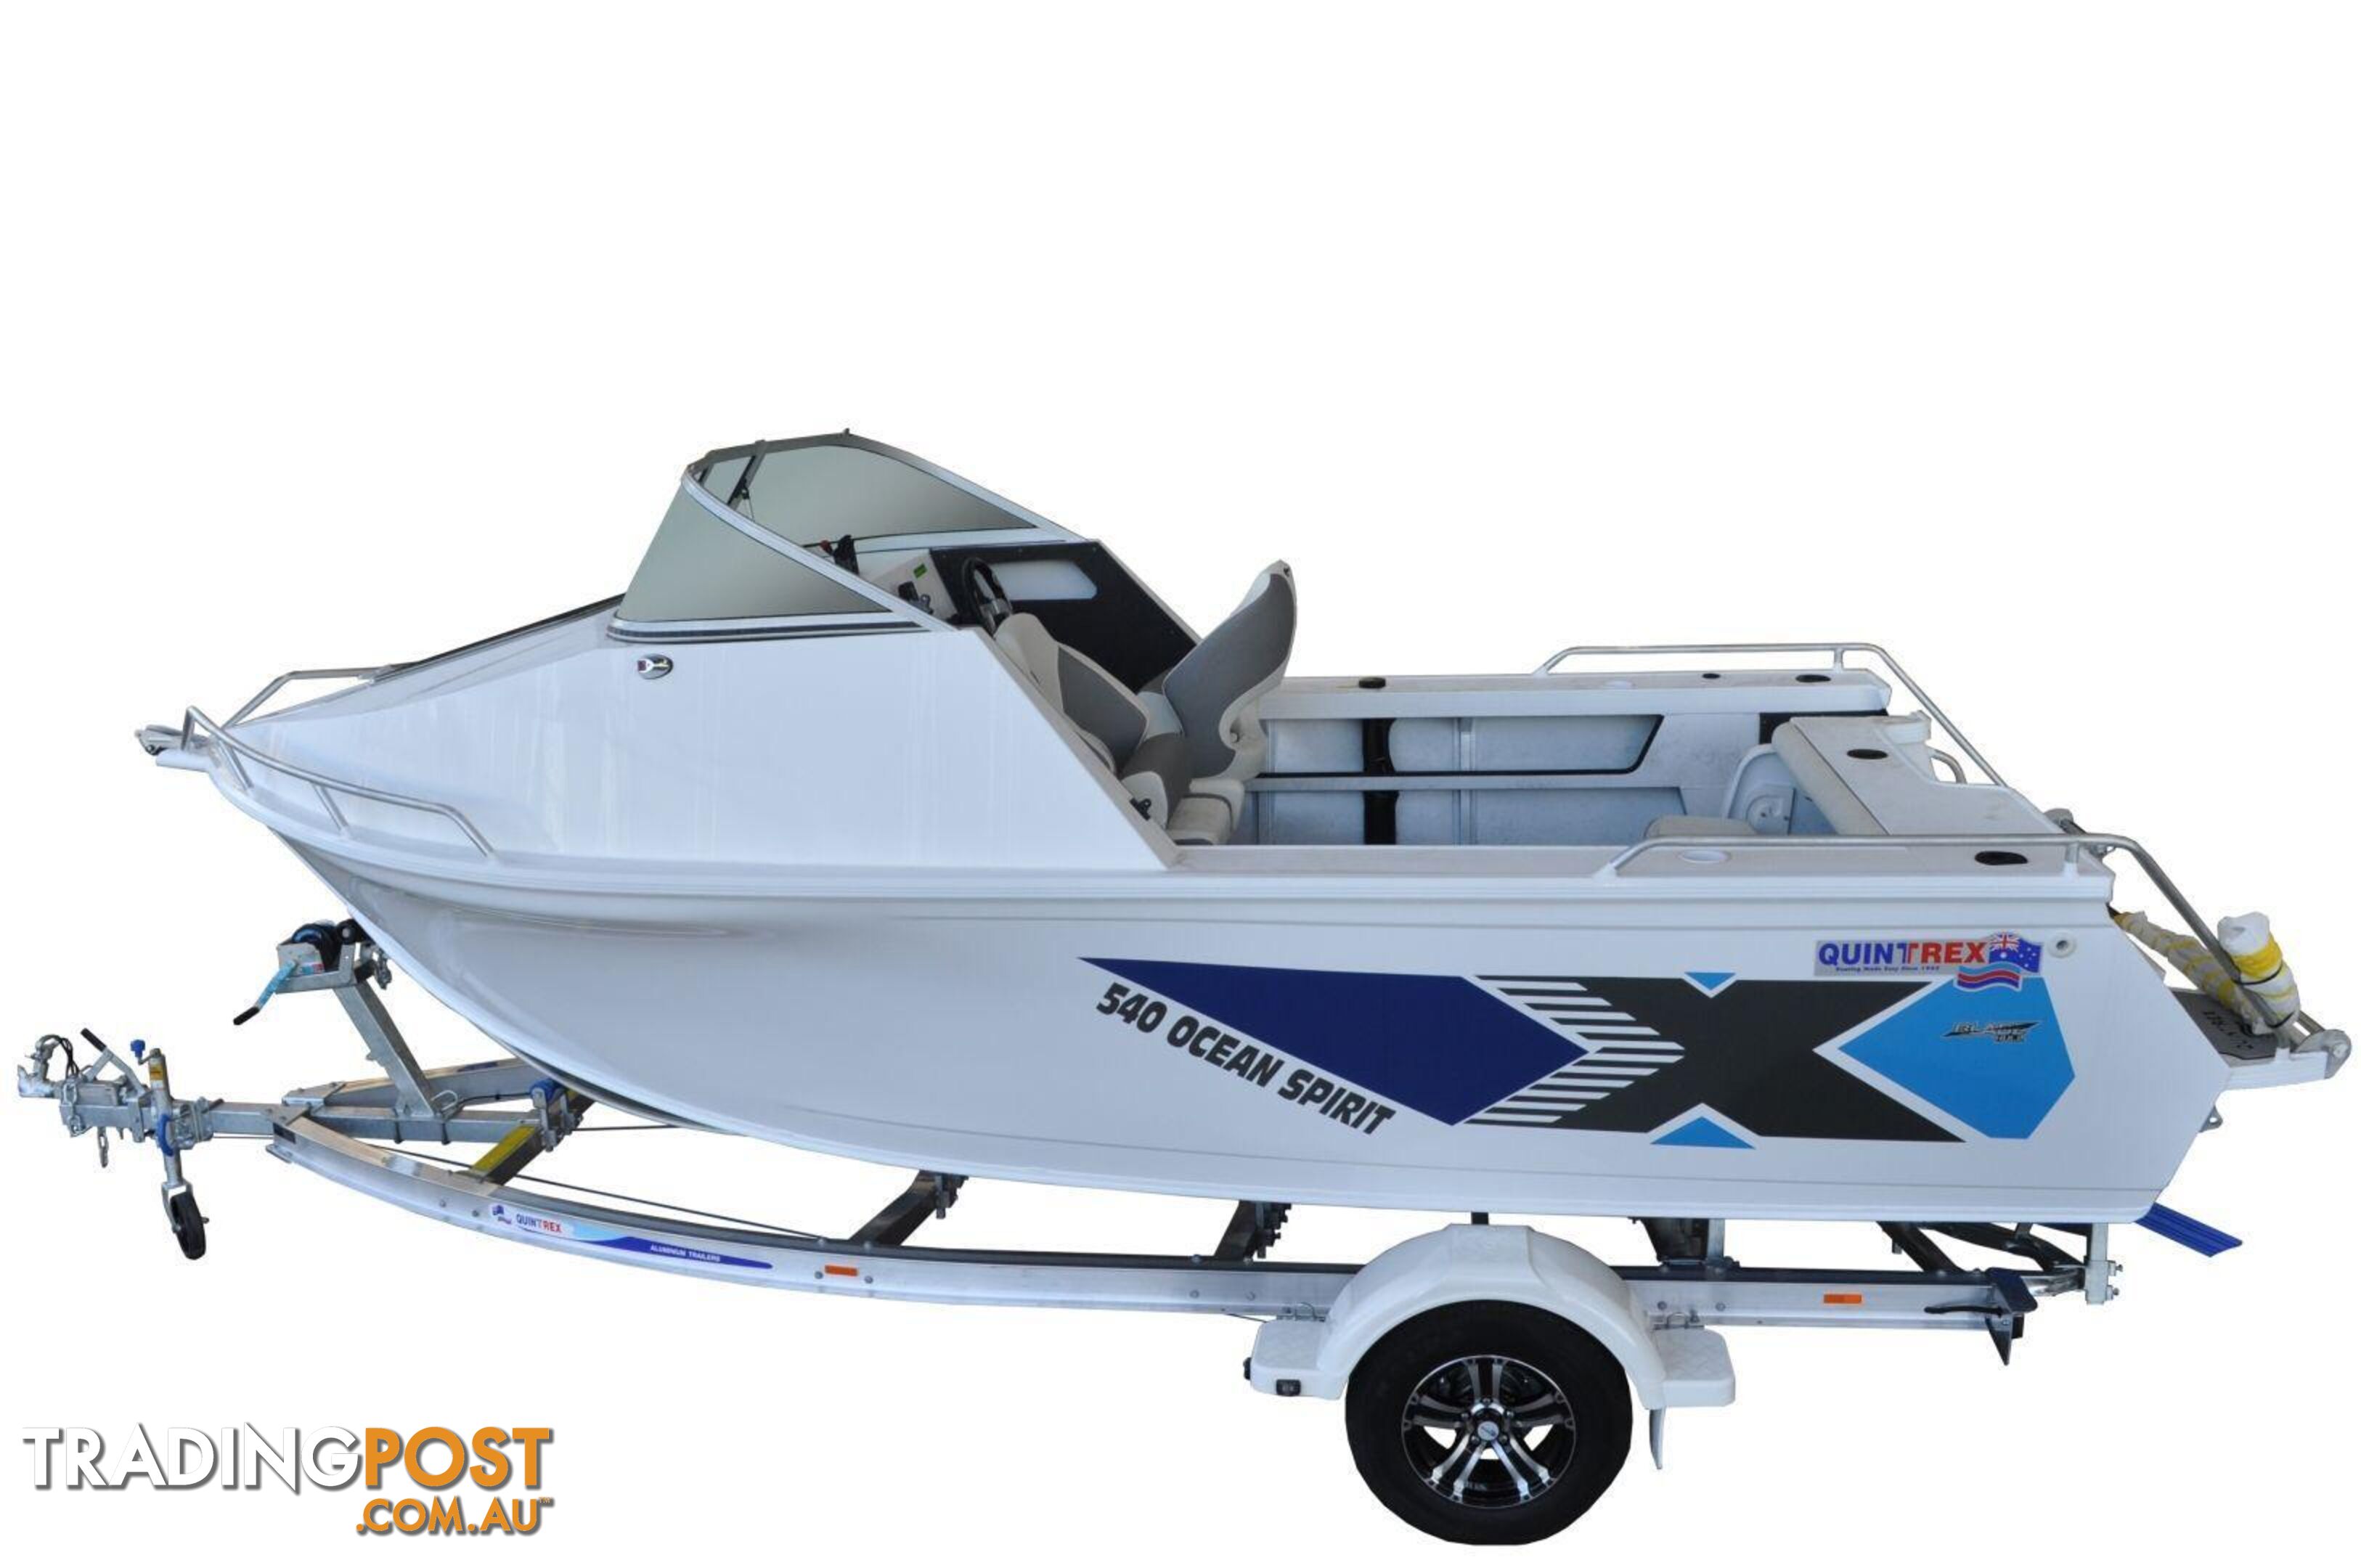 Quintrex 540 Ocean Spirit + Yamaha F115hp 4-Stroke - Pack 1 for sale online prices